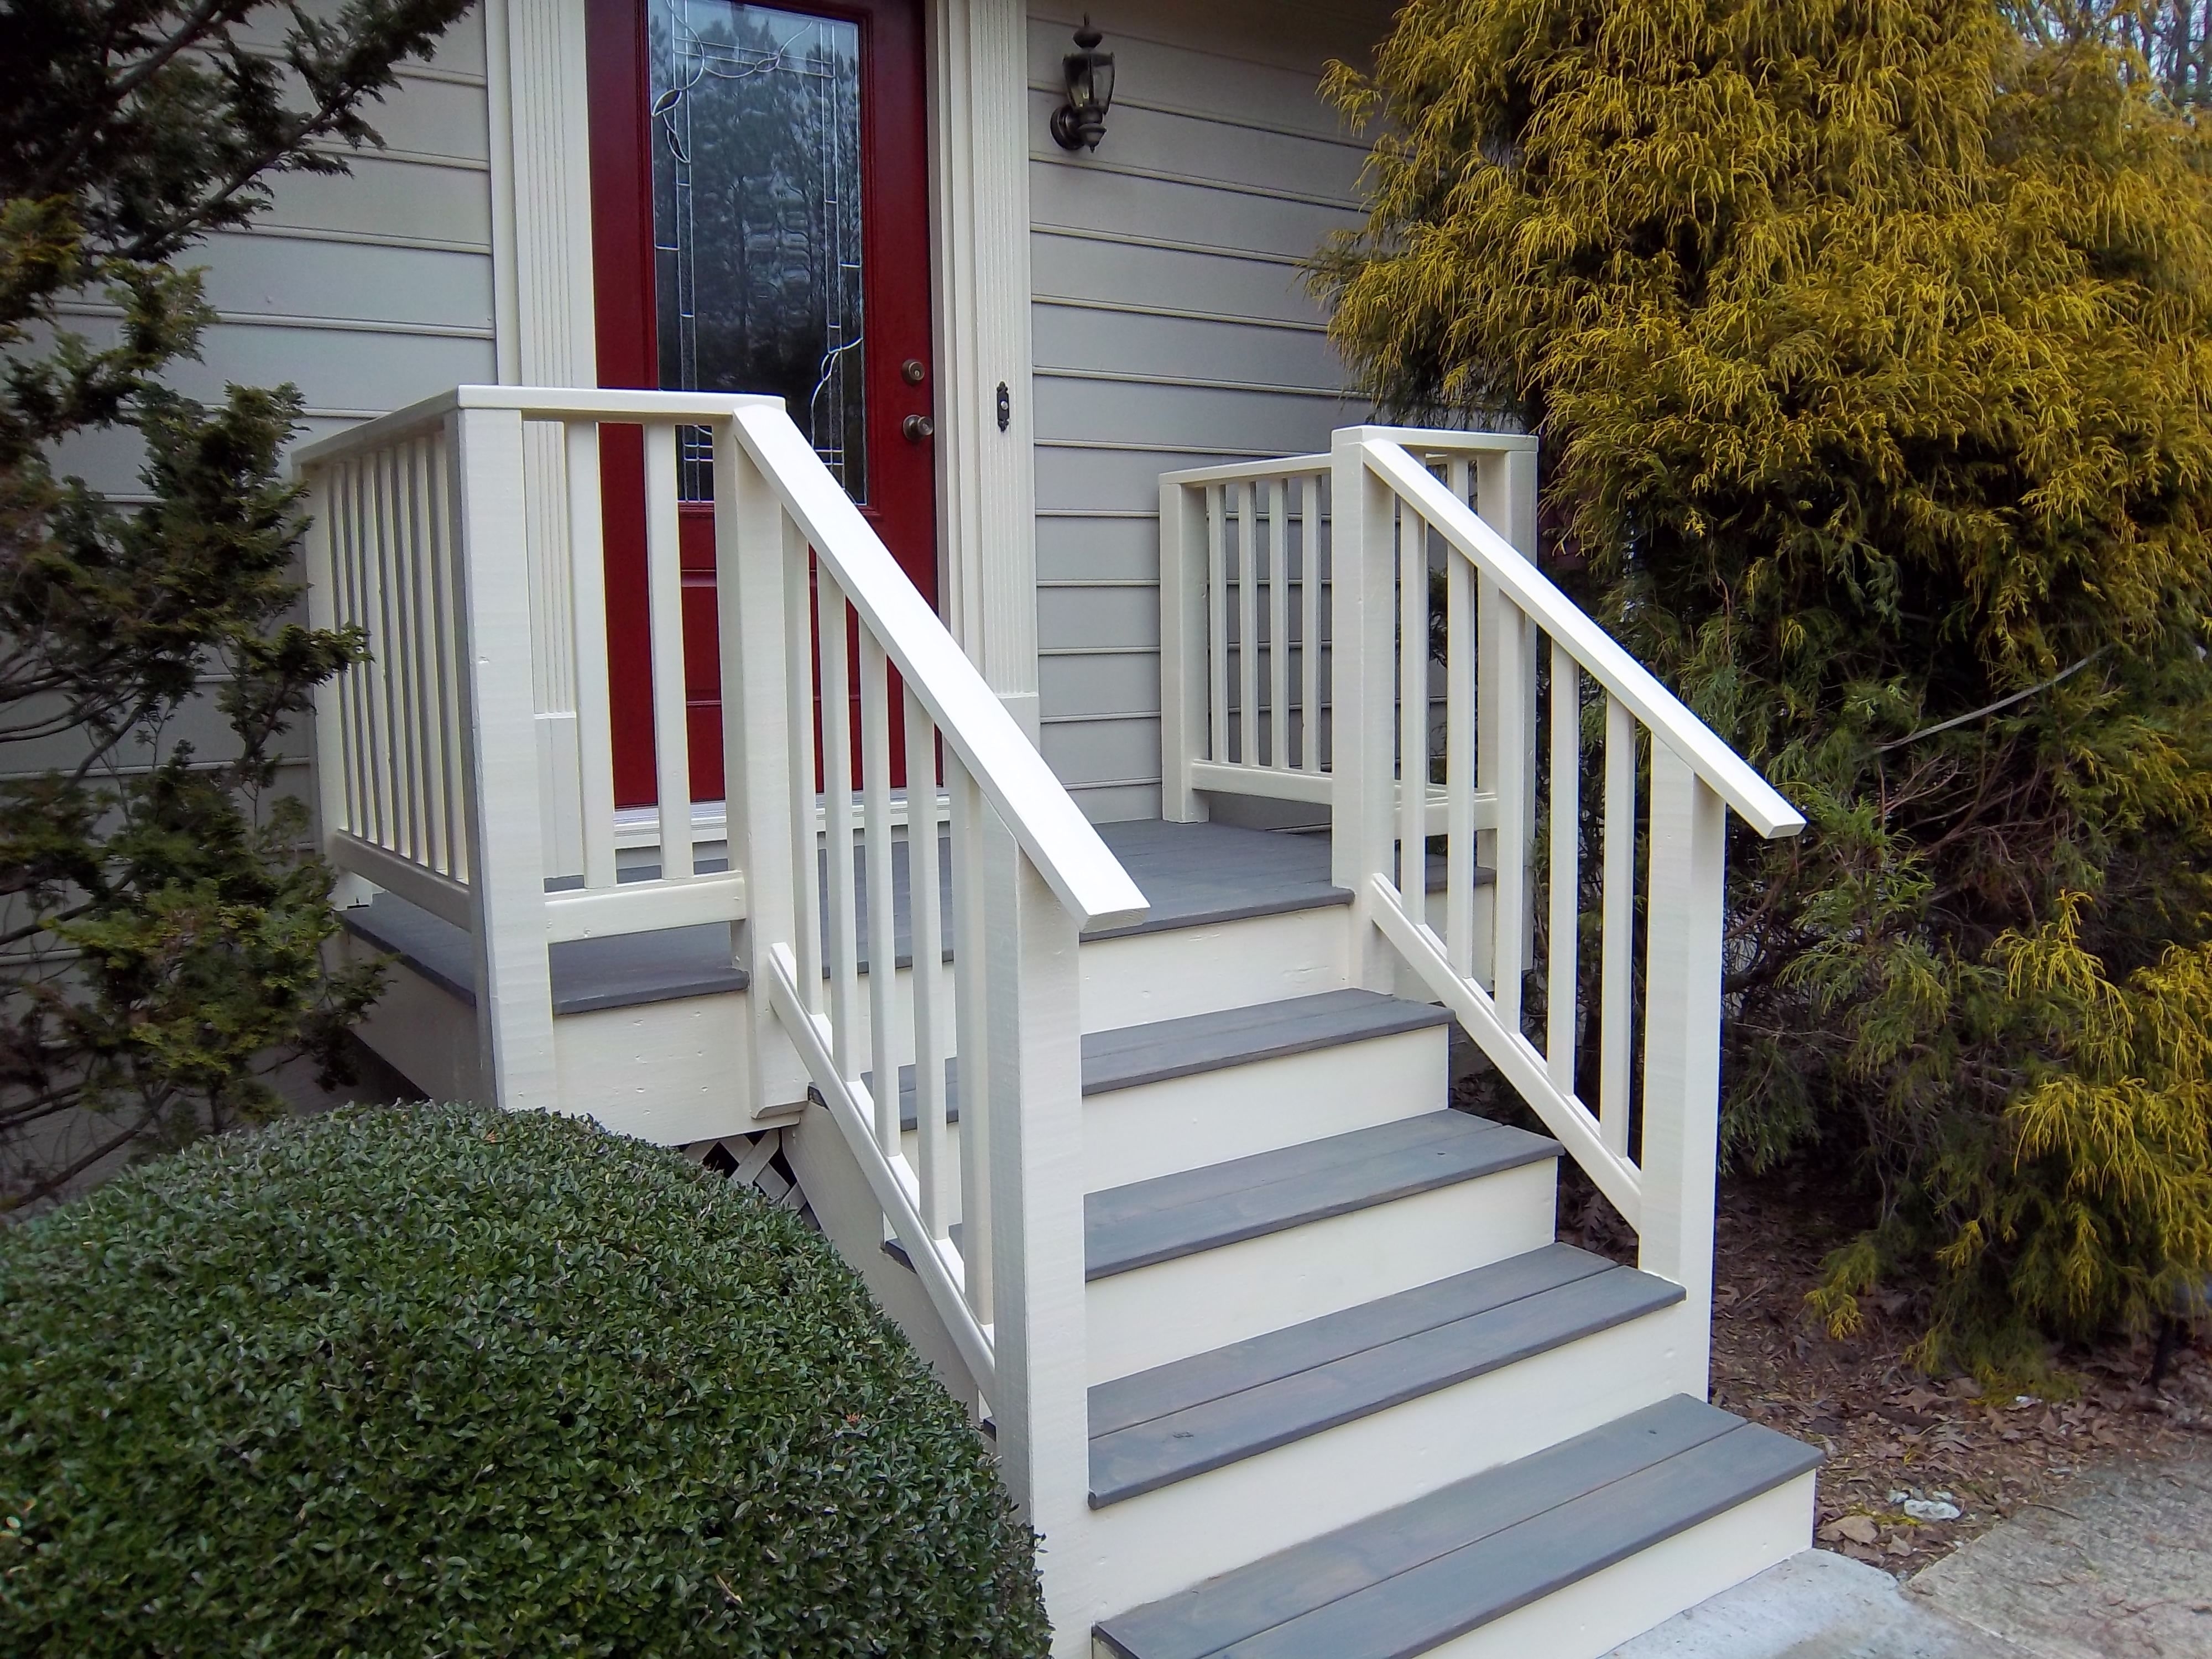 Access Ramp With Handrails For Porch Steps